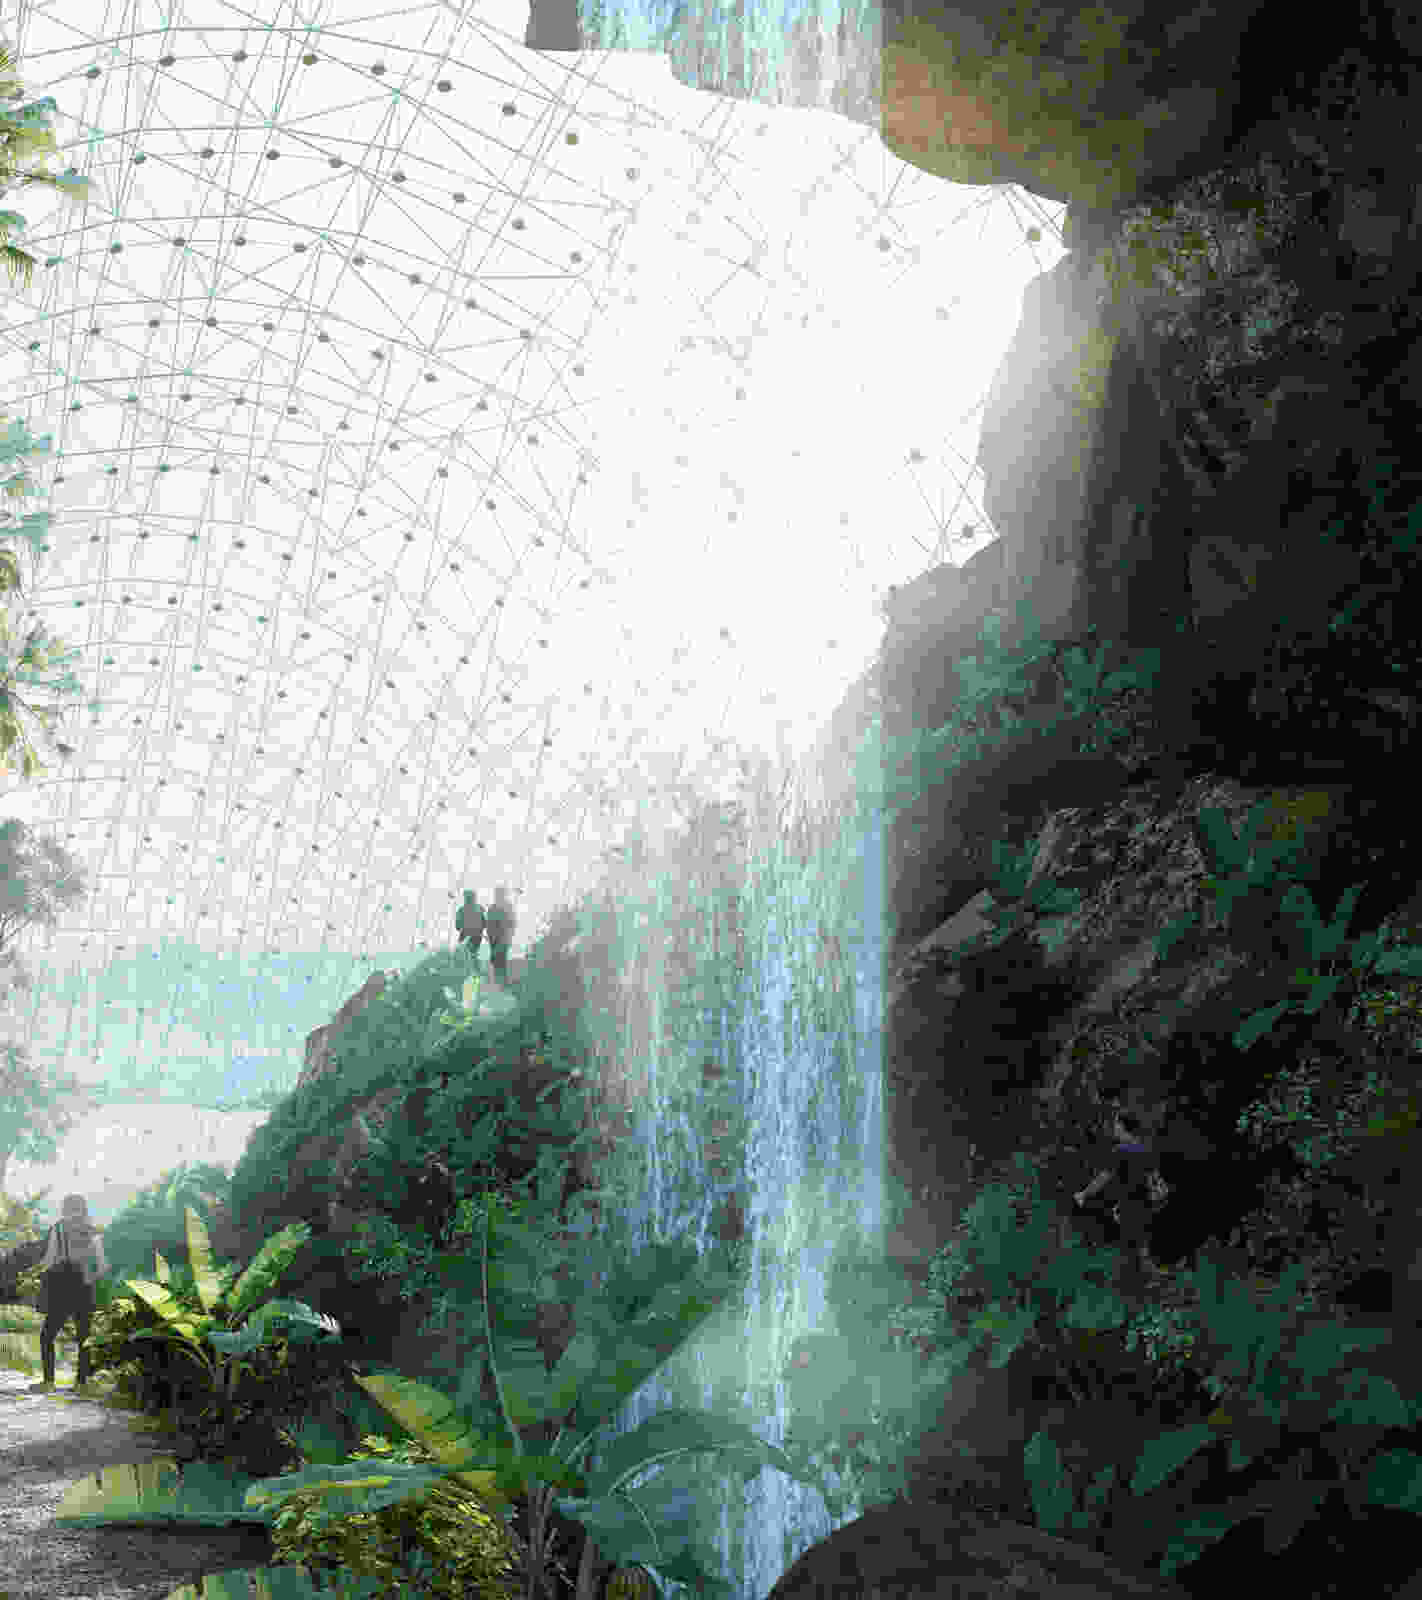 420 DMAA Greenhouse vis 007 02a The Natural Rainforest